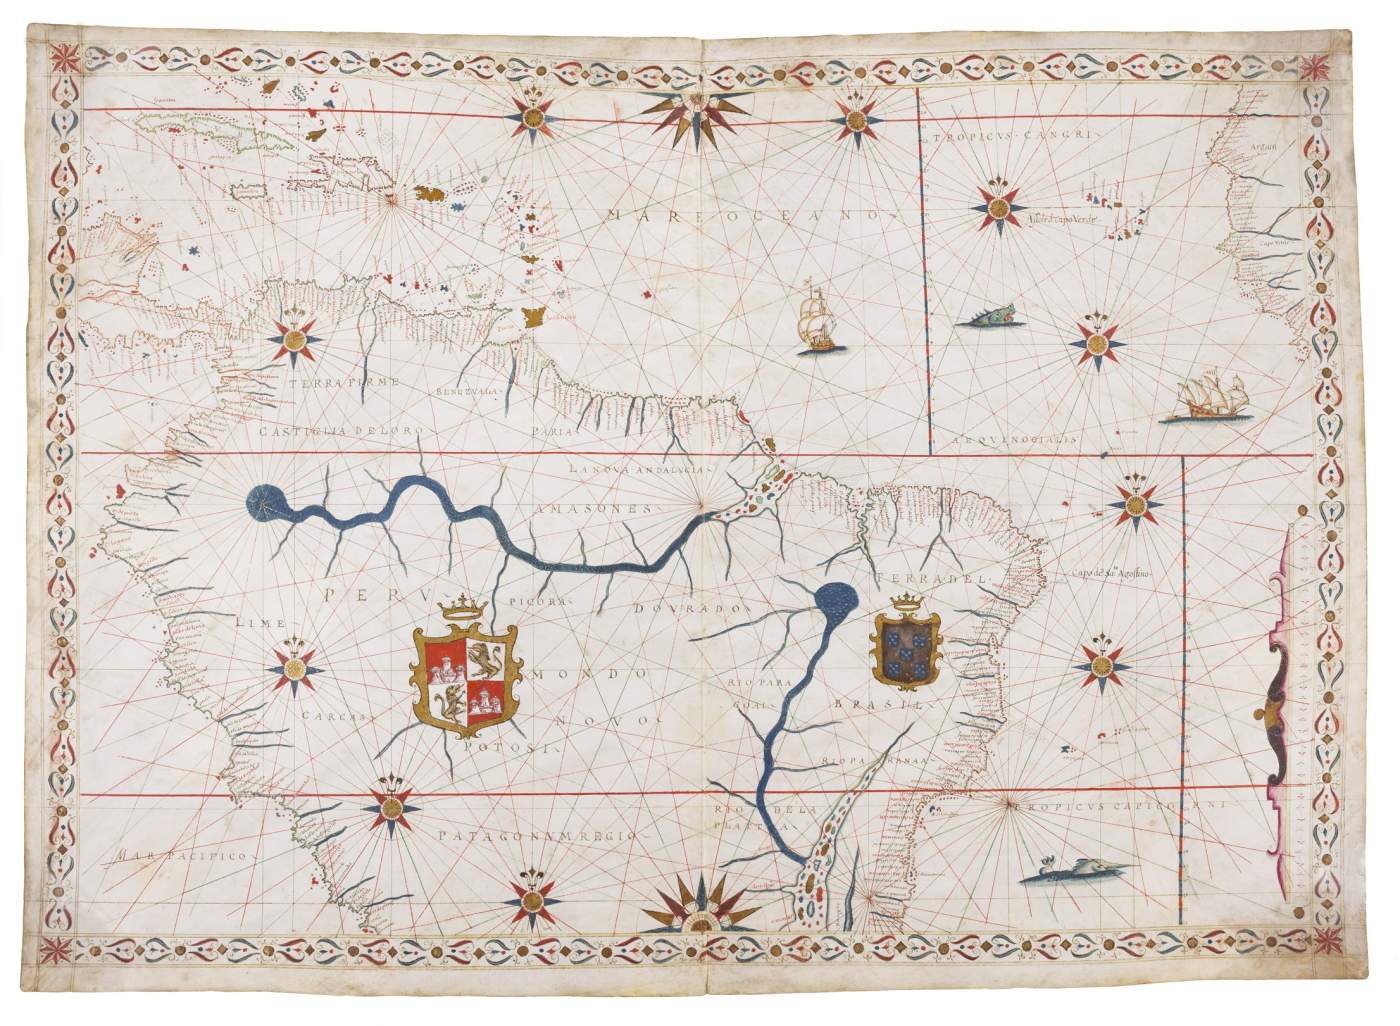 Magnificent portolan chart of northern part of South America